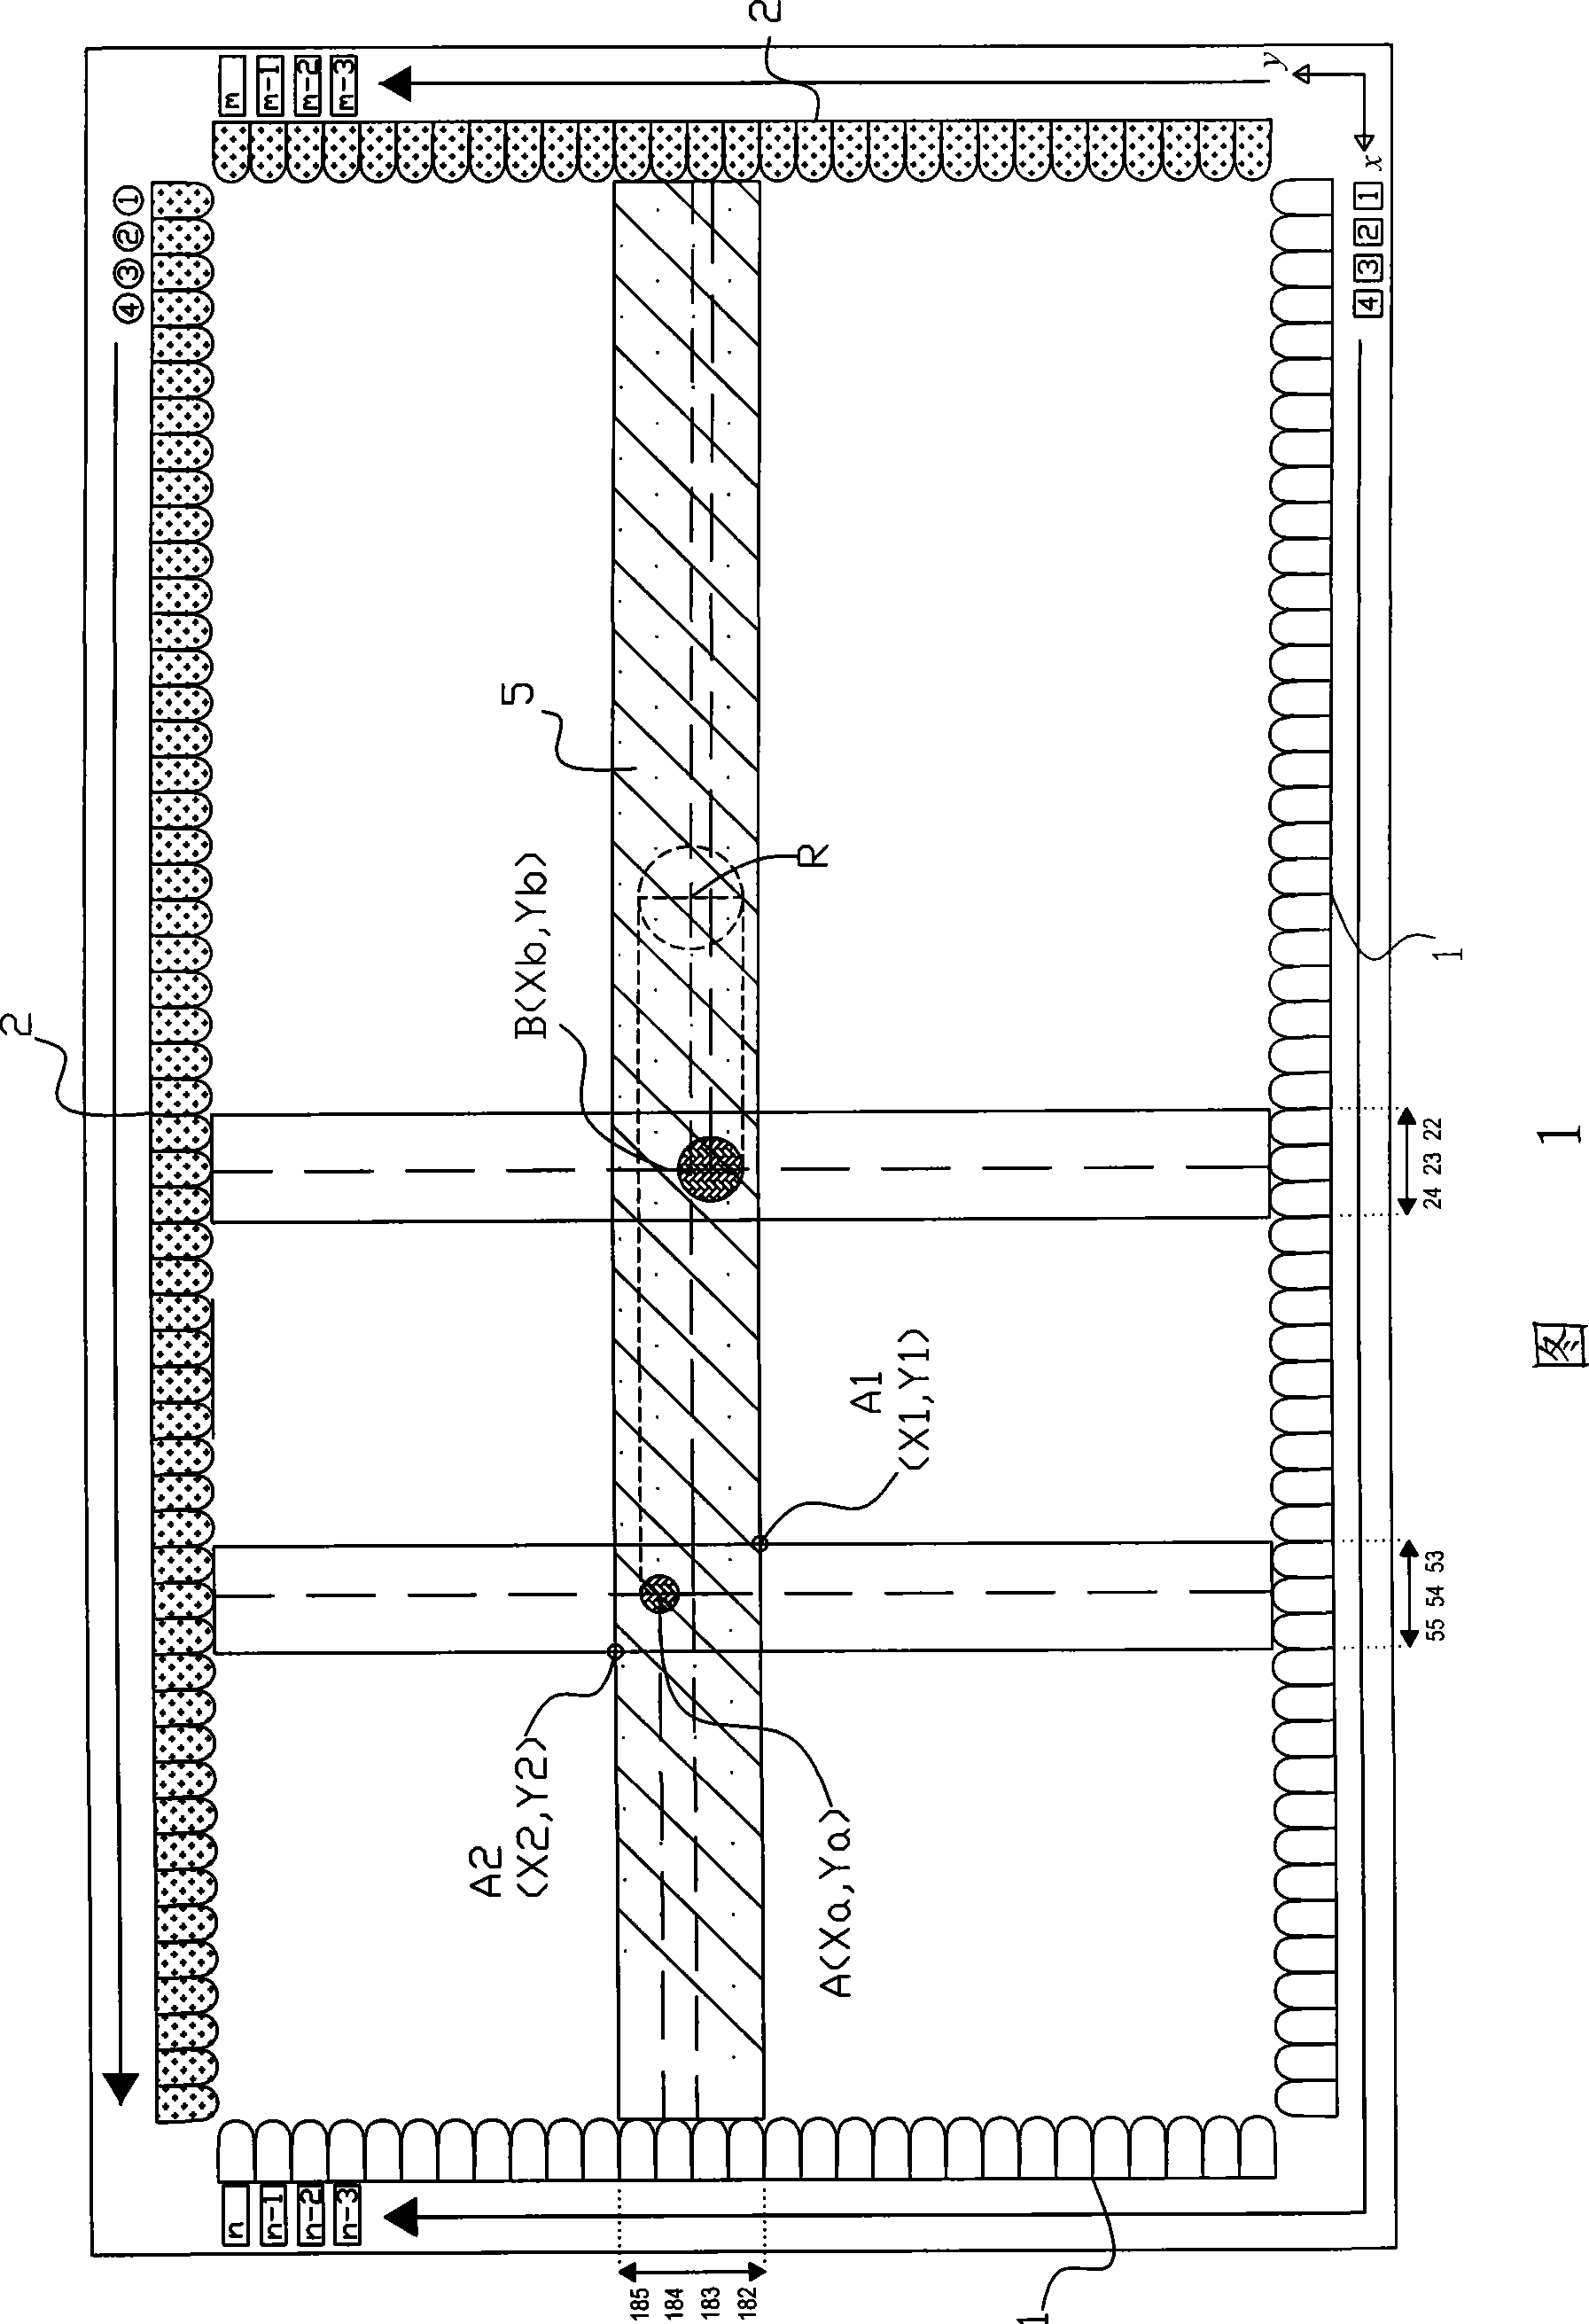 Infrared touch screen multi-point recognizing method